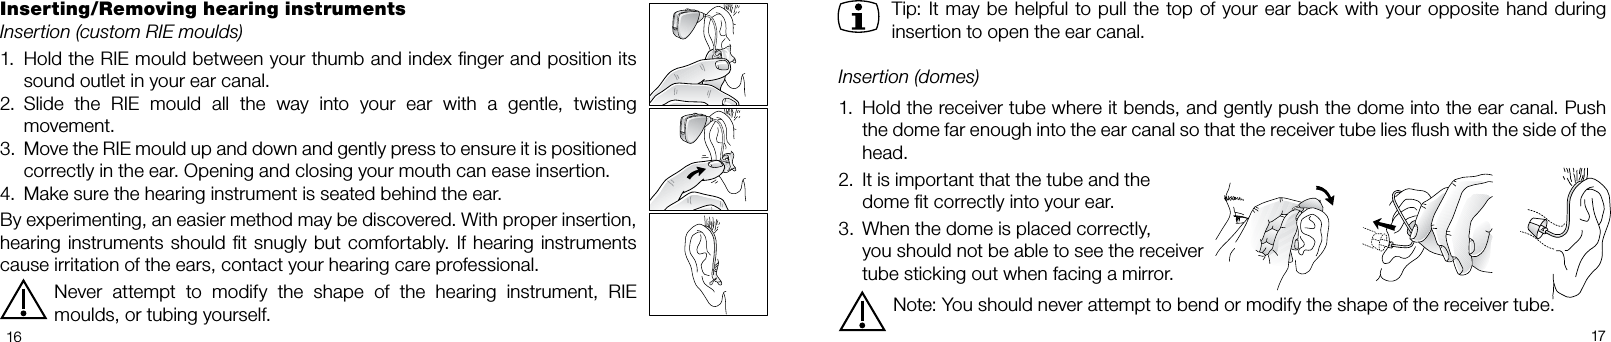   1617Tip: It may be helpful to pull the top of your ear back  with  your  opposite hand  during insertion to open the ear canal. Insertion (domes)1.  Hold the receiver tube where it bends, and gently push the dome into the ear canal. Push the dome far enough into the ear canal so that the receiver tube lies ﬂush with the side of the head.2.  It is important that the tube and the   dome t correctly into your ear.3.  When the dome is placed correctly,   you should not be able to see the receiver   tube sticking out when facing a mirror.Note: You should never attempt to bend or modify the shape of the receiver tube.Inserting/Removing hearing instrumentsInsertion (custom RIE moulds)1.  Hold the RIE mould between your thumb and index nger and position its sound outlet in your ear canal.2.  Slide  the  RIE  mould  all  the  way  into  your  ear  with  a  gentle,  twisting movement.3.  Move the RIE mould up and down and gently press to ensure it is positioned correctly in the ear. Opening and closing your mouth can ease insertion.4.  Make sure the hearing instrument is seated behind the ear.By experimenting, an easier method may be discovered. With proper insertion,  hearing instruments should  t  snugly  but comfortably.  If  hearing  instruments cause irritation of the ears, contact your hearing care professional. Never  attempt  to  modify  the  shape  of  the  hearing  instrument,  RIE moulds, or tubing yourself.